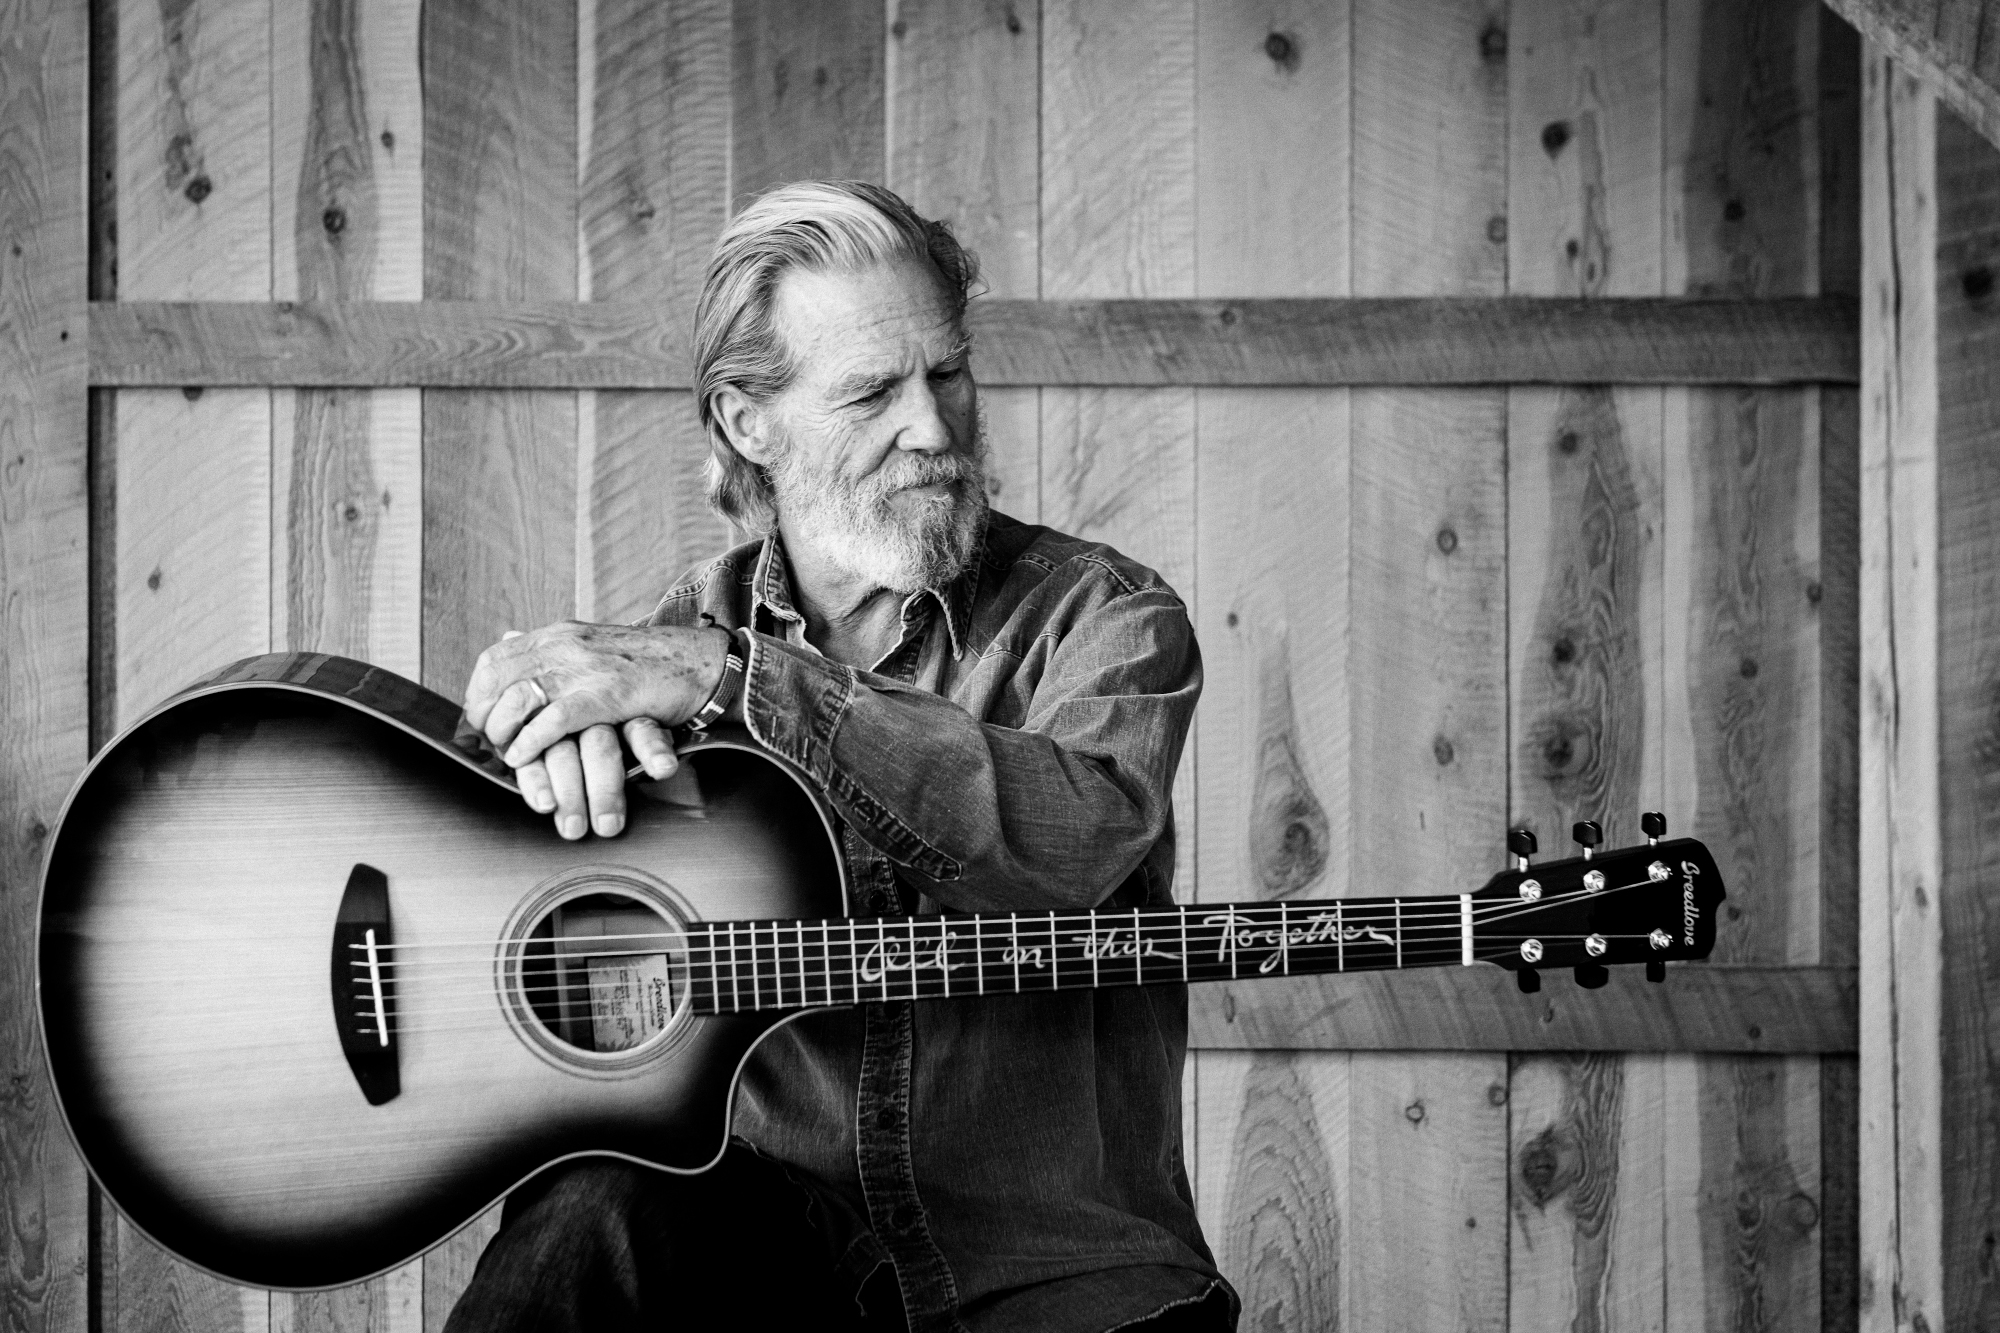 Jeff Bridges Assures Us We’re All in This Together